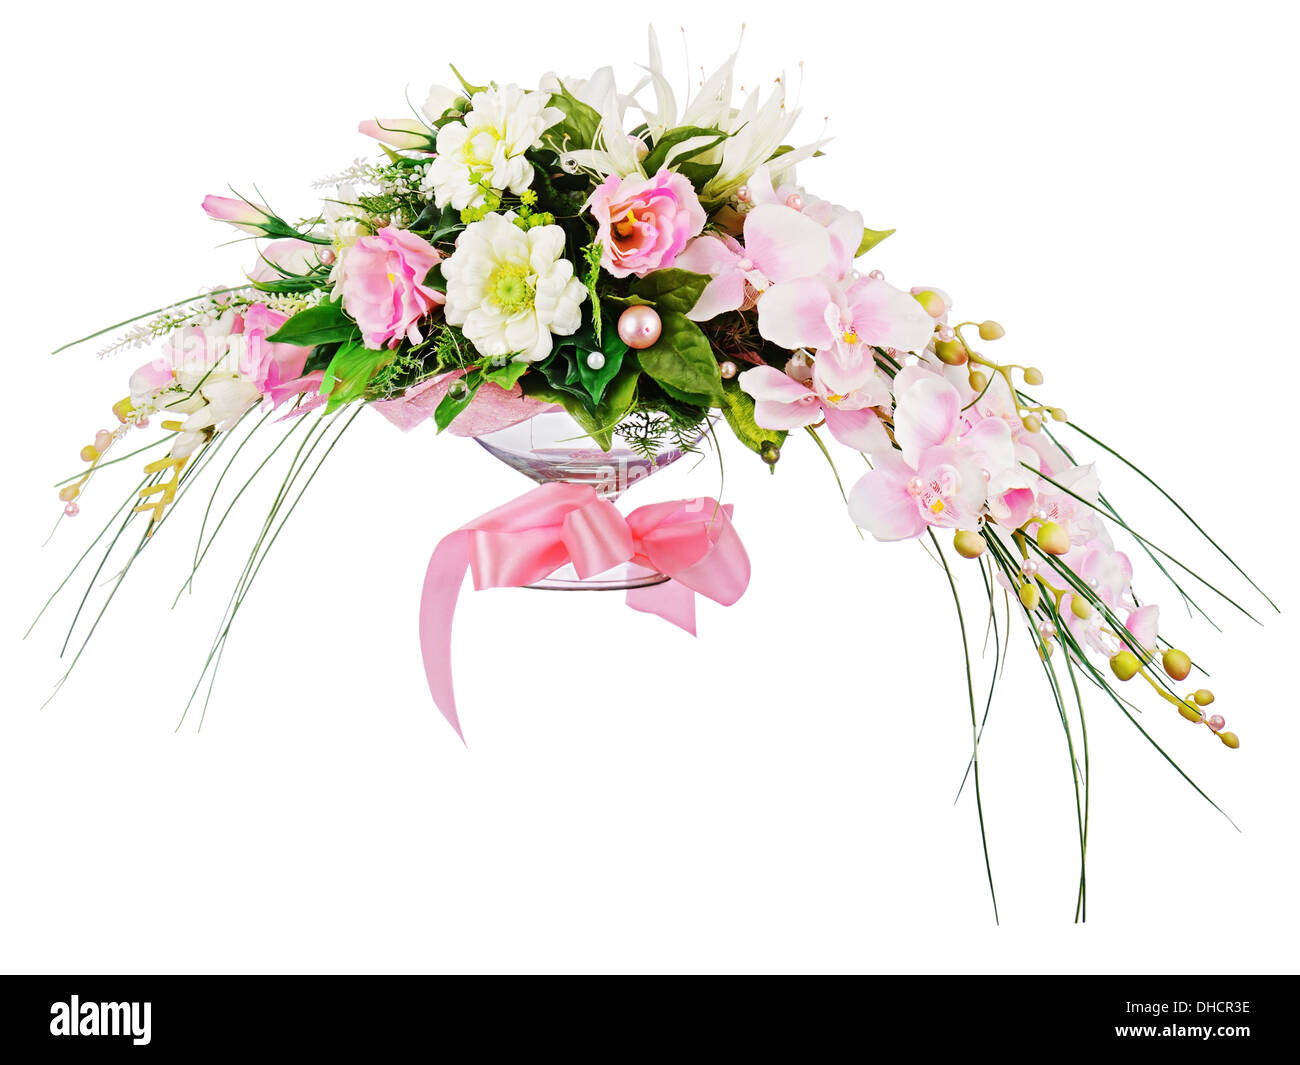 Floral bouquet of roses and orchids arrangement centerpiece isolated on white background. Closeup. Stock Photo